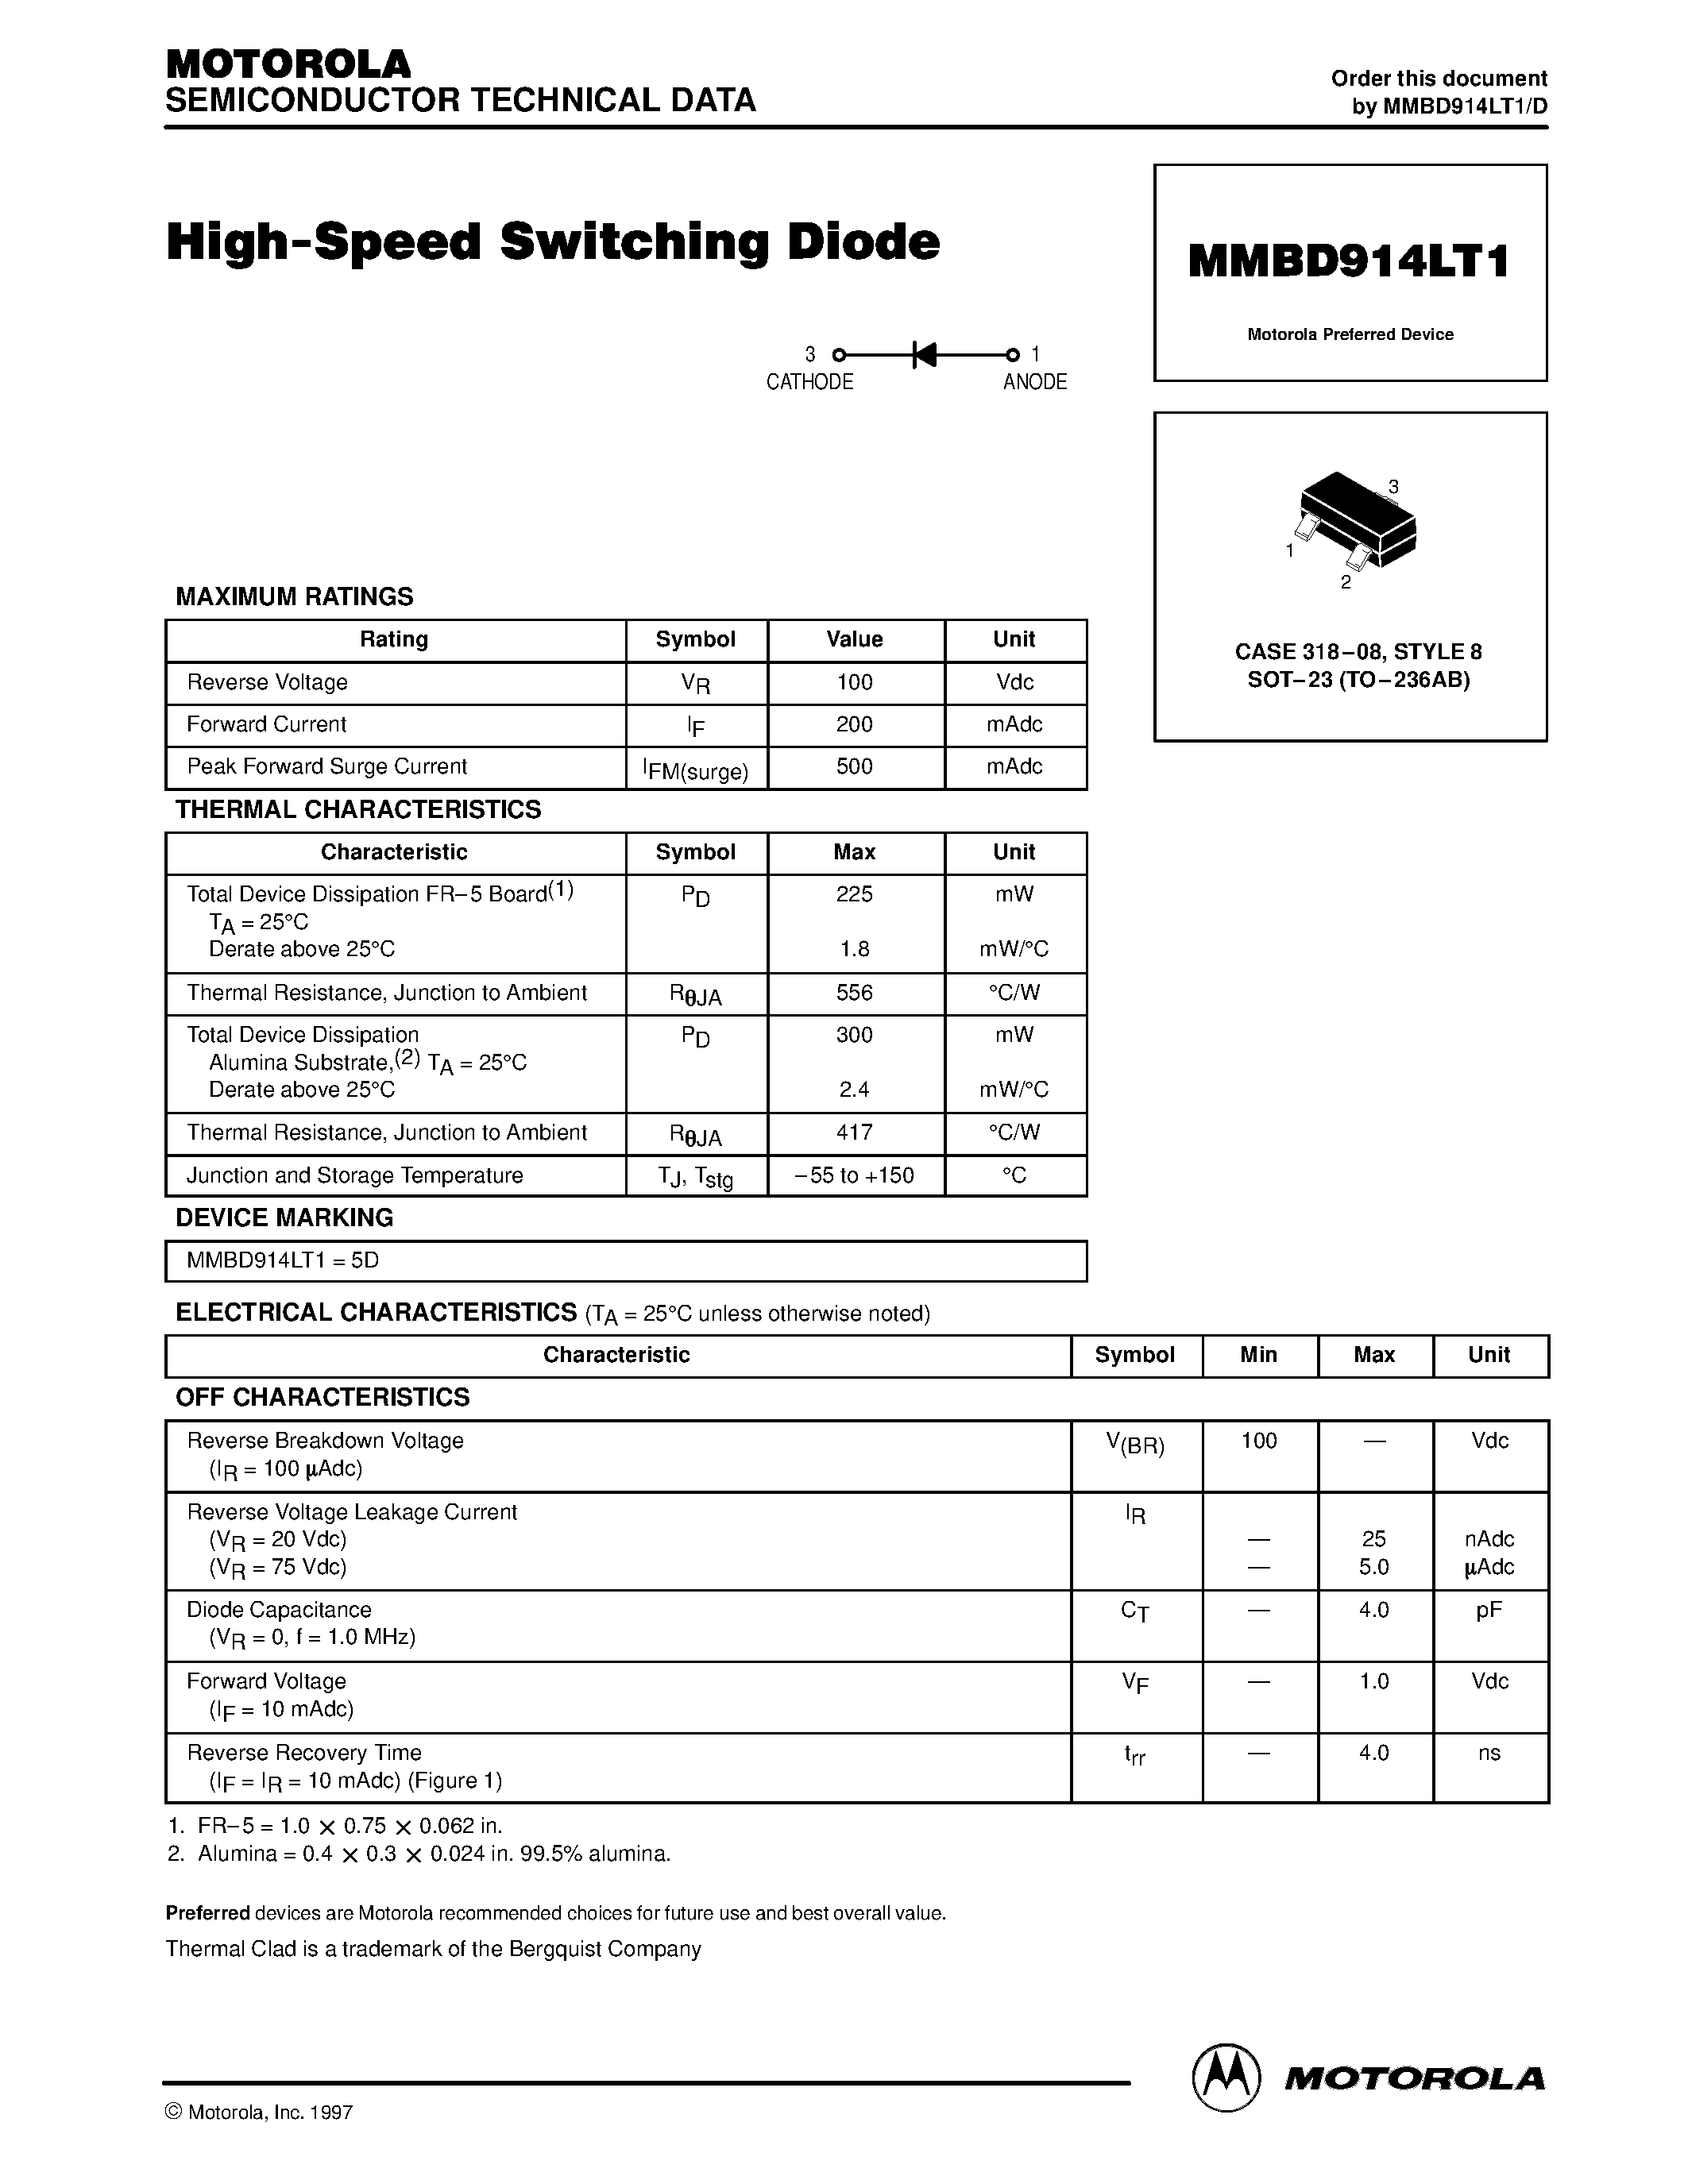 Datasheet MMBD914LT1 - High-Speed Switching Diode page 1